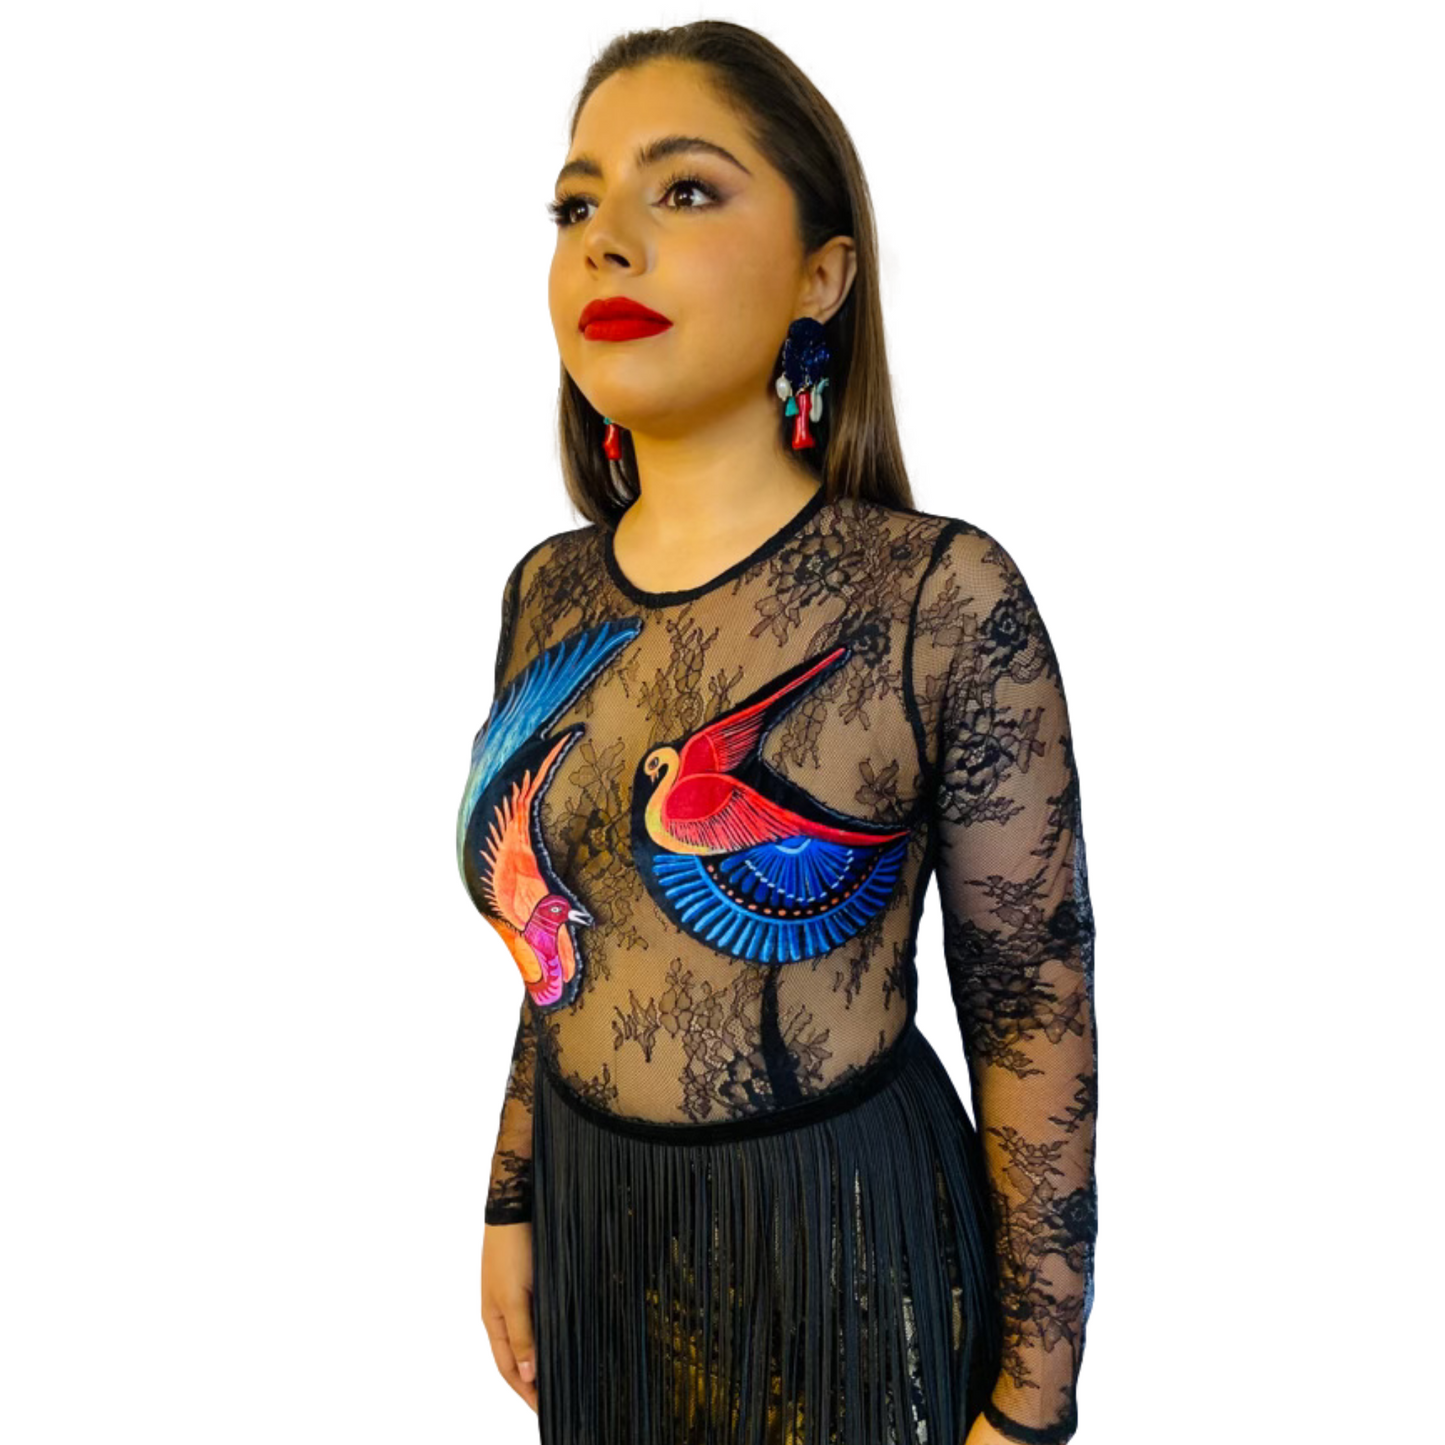 Mexican Fashion Embroidered Dress - Nayibi Mexico Amate Birds Black Dress Colores Decor